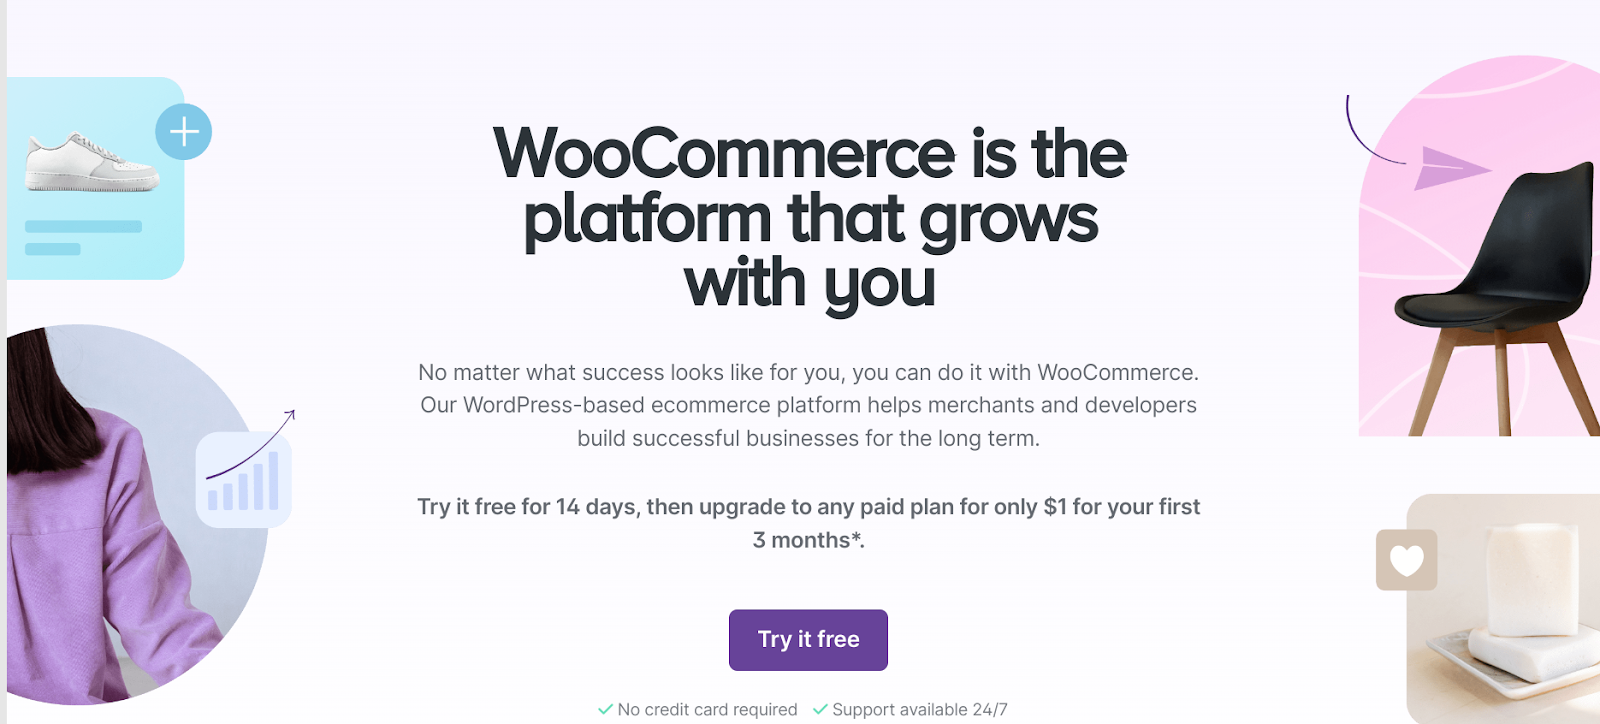 AliExpress Dropshipping with woocommerce